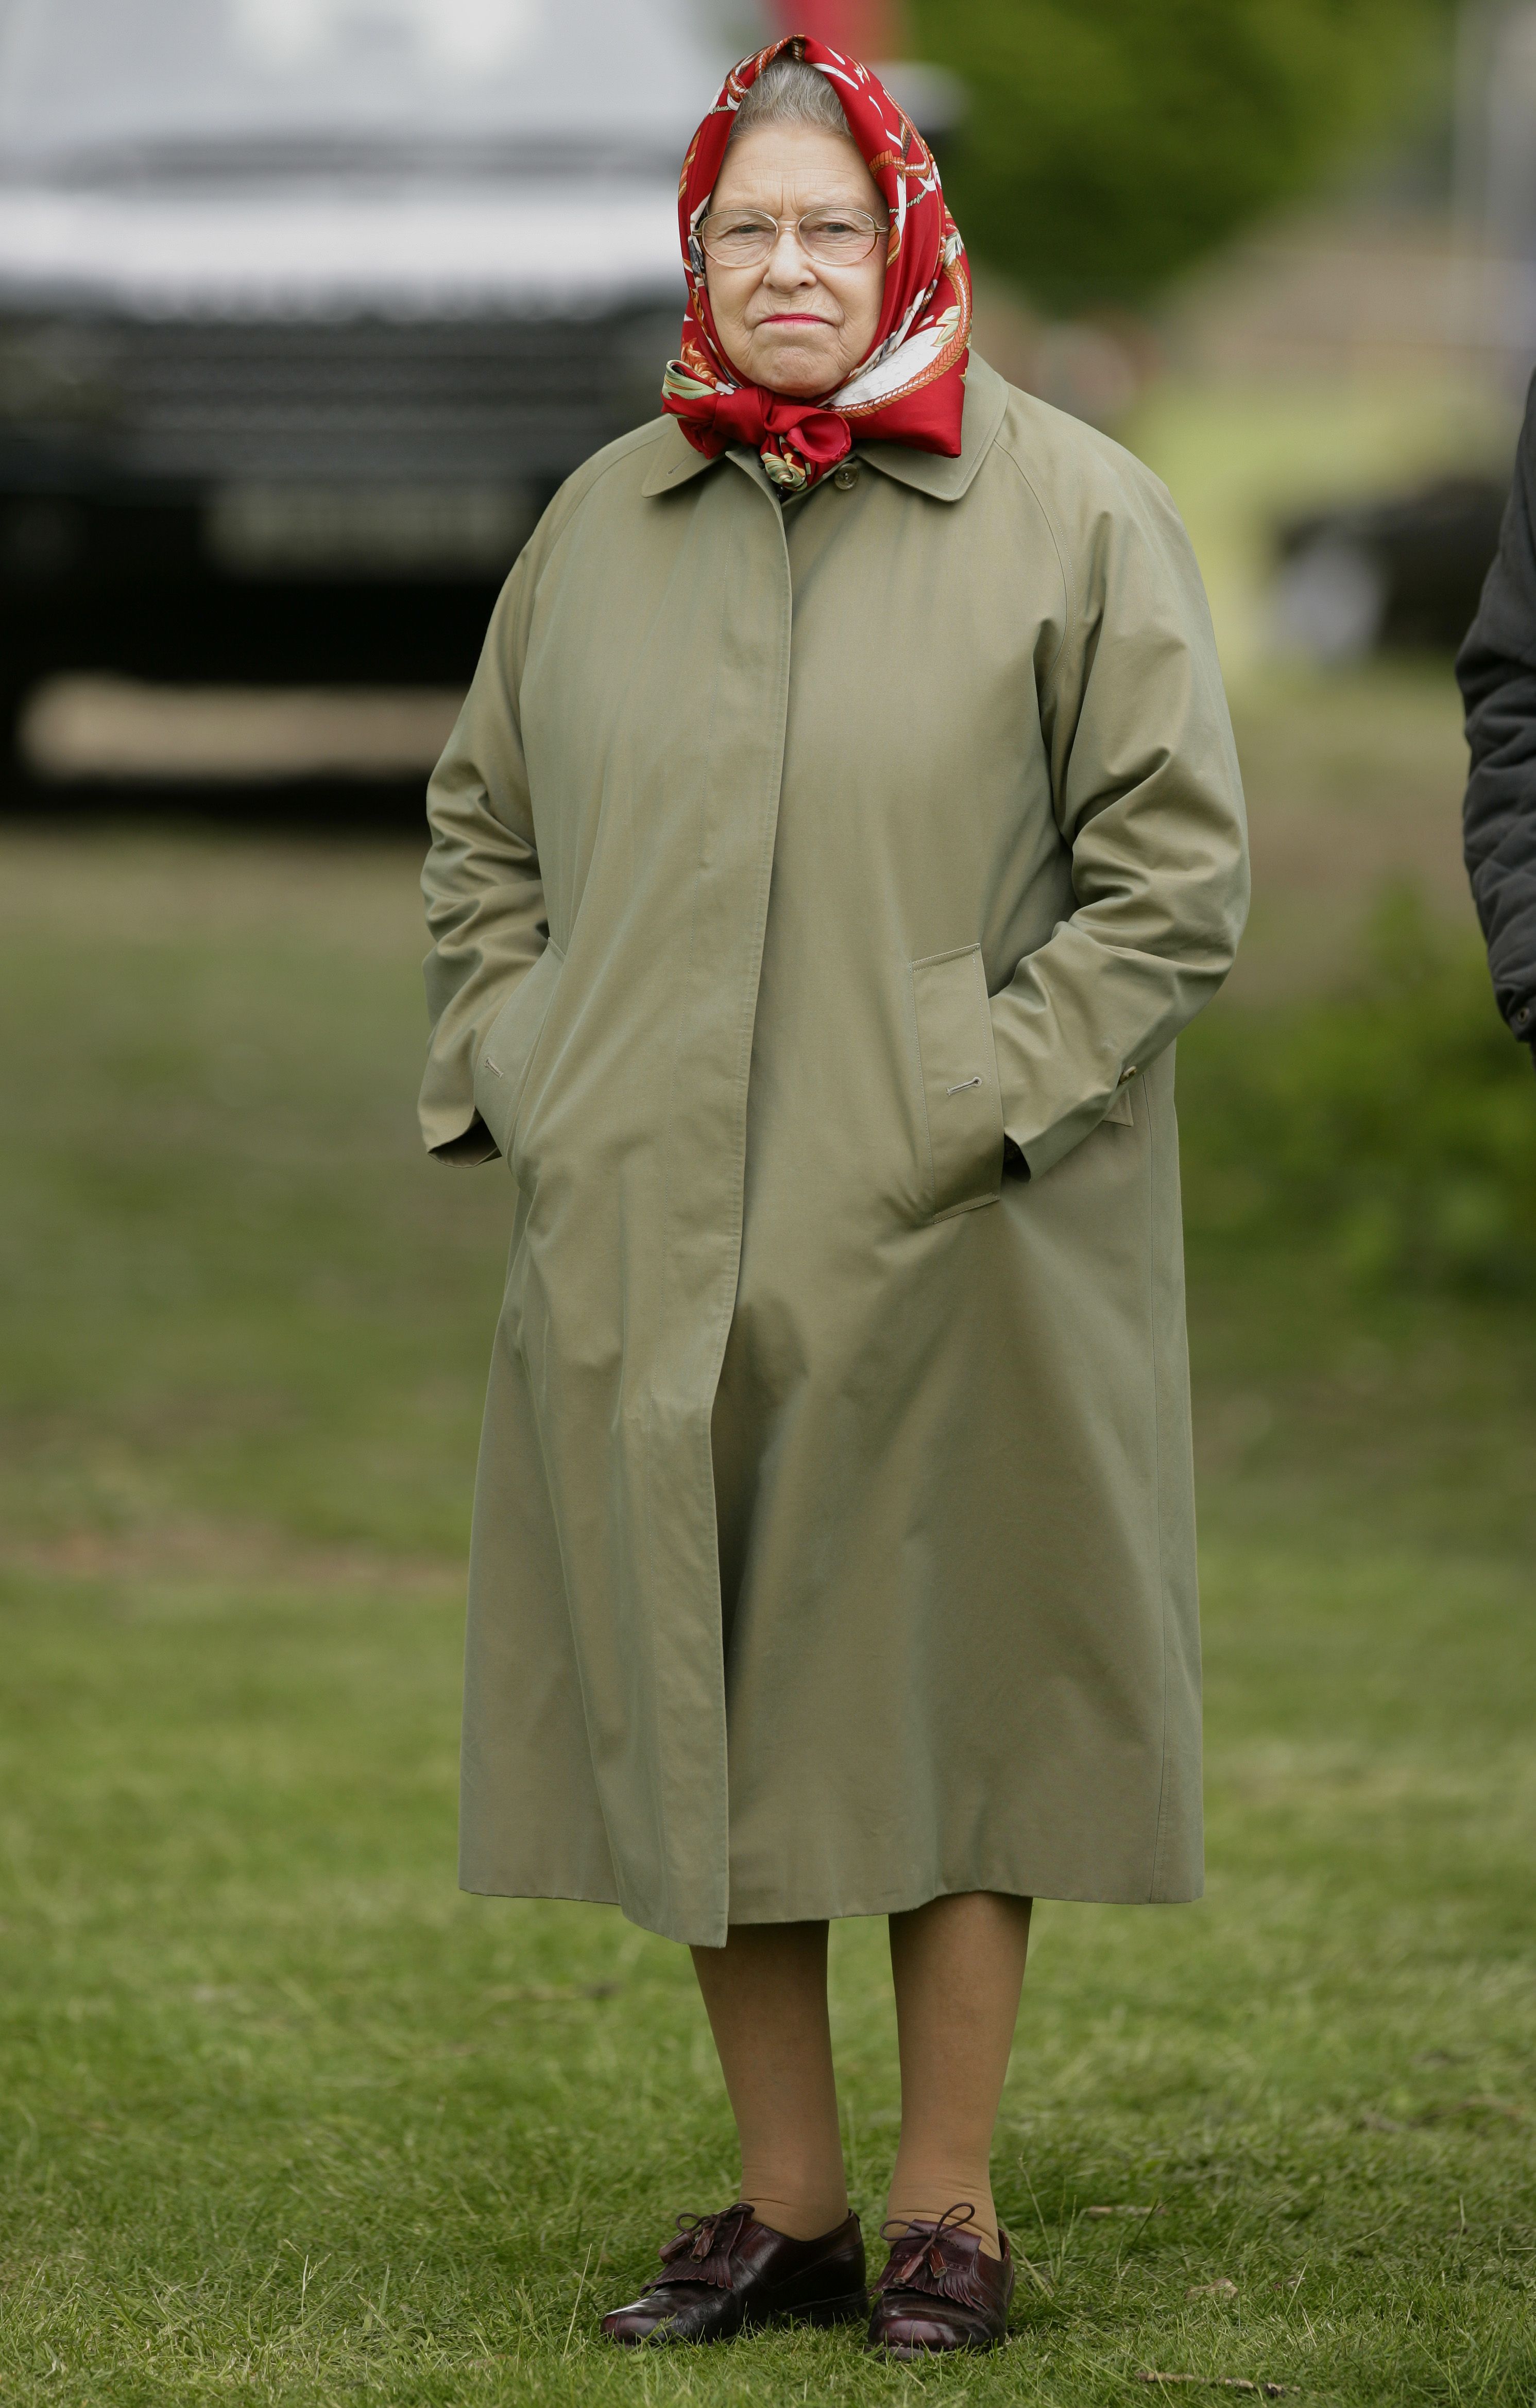 14 Photos of Royals Wearing Trench Coats - Meghan Markle, Kate